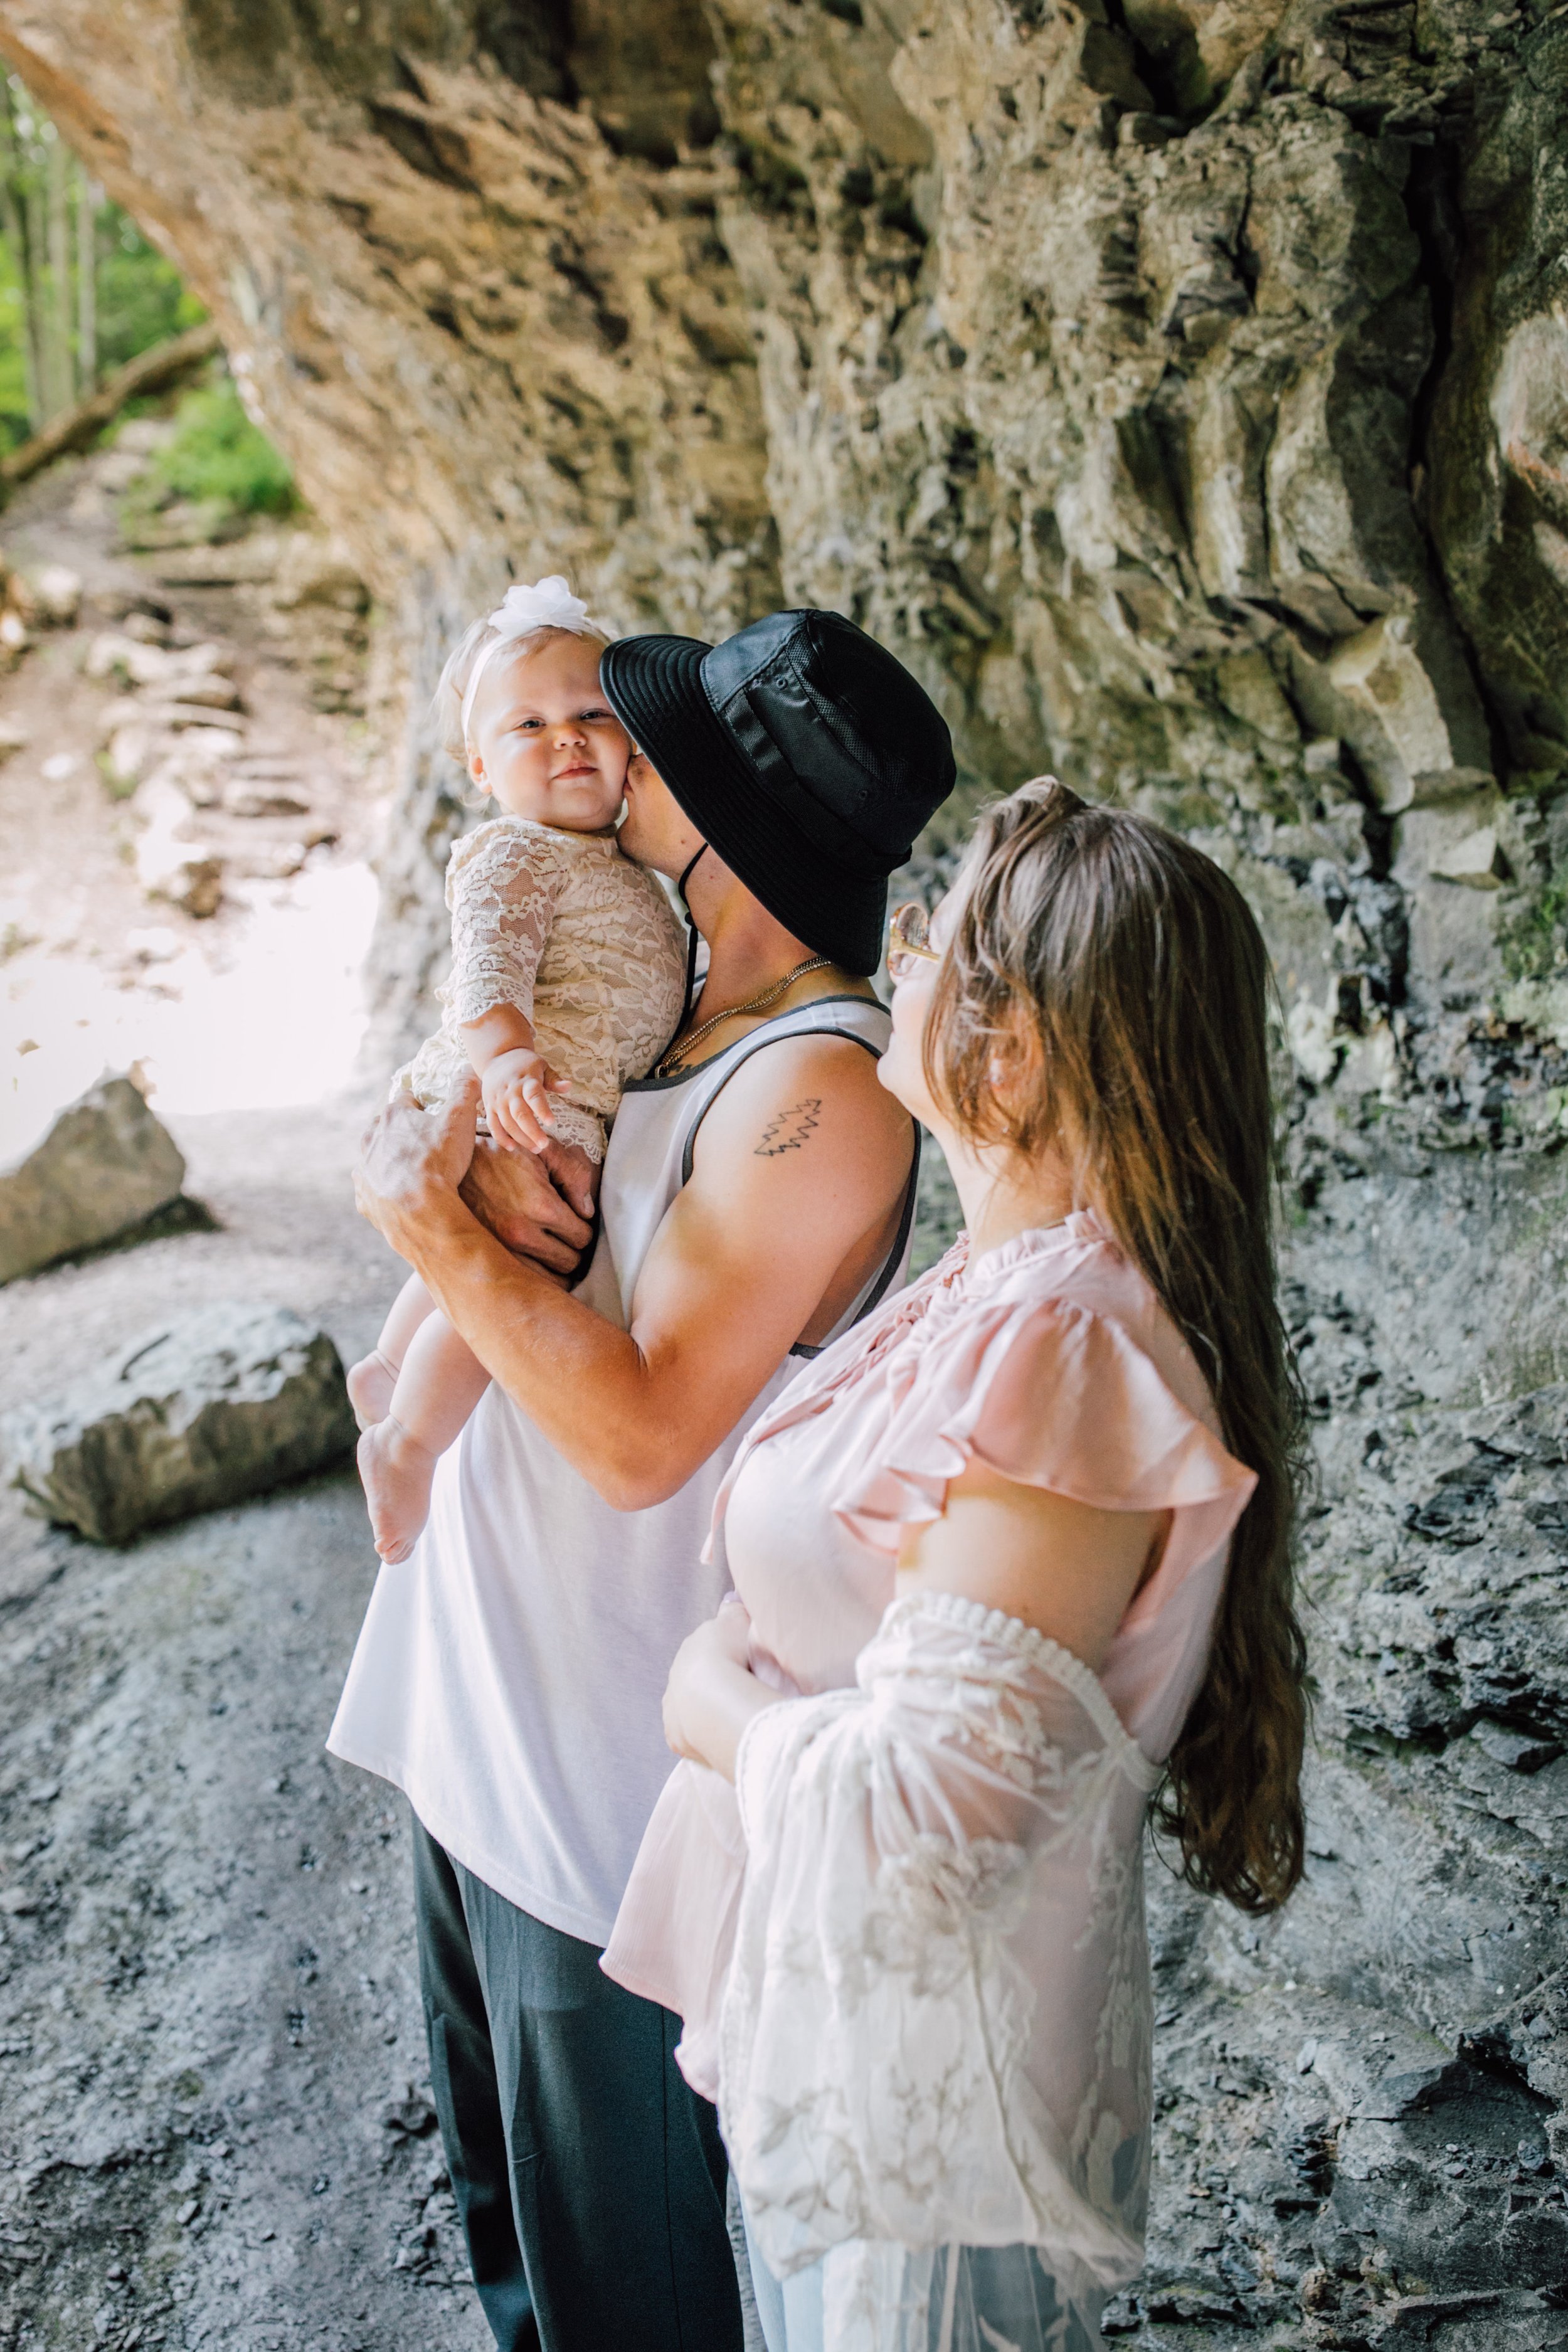  Family stands together in a rocky area while dad kisses their baby’s cheek at a tinker falls waterfall shoot 